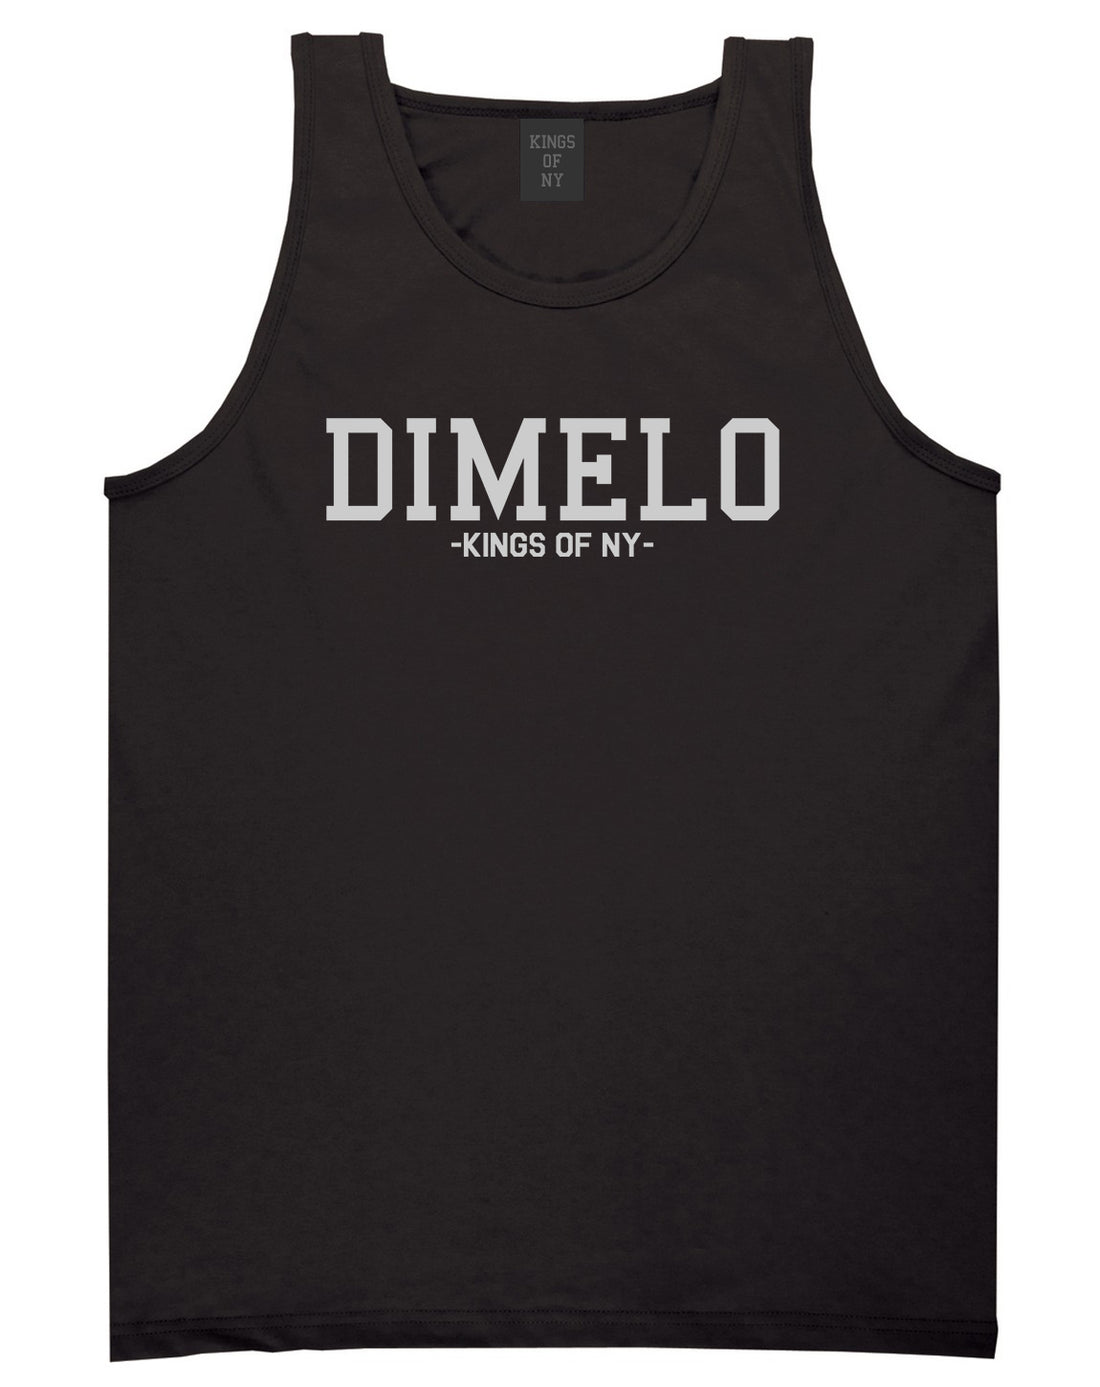 Dimelo Kings Of NY Tank Top Shirt in Black